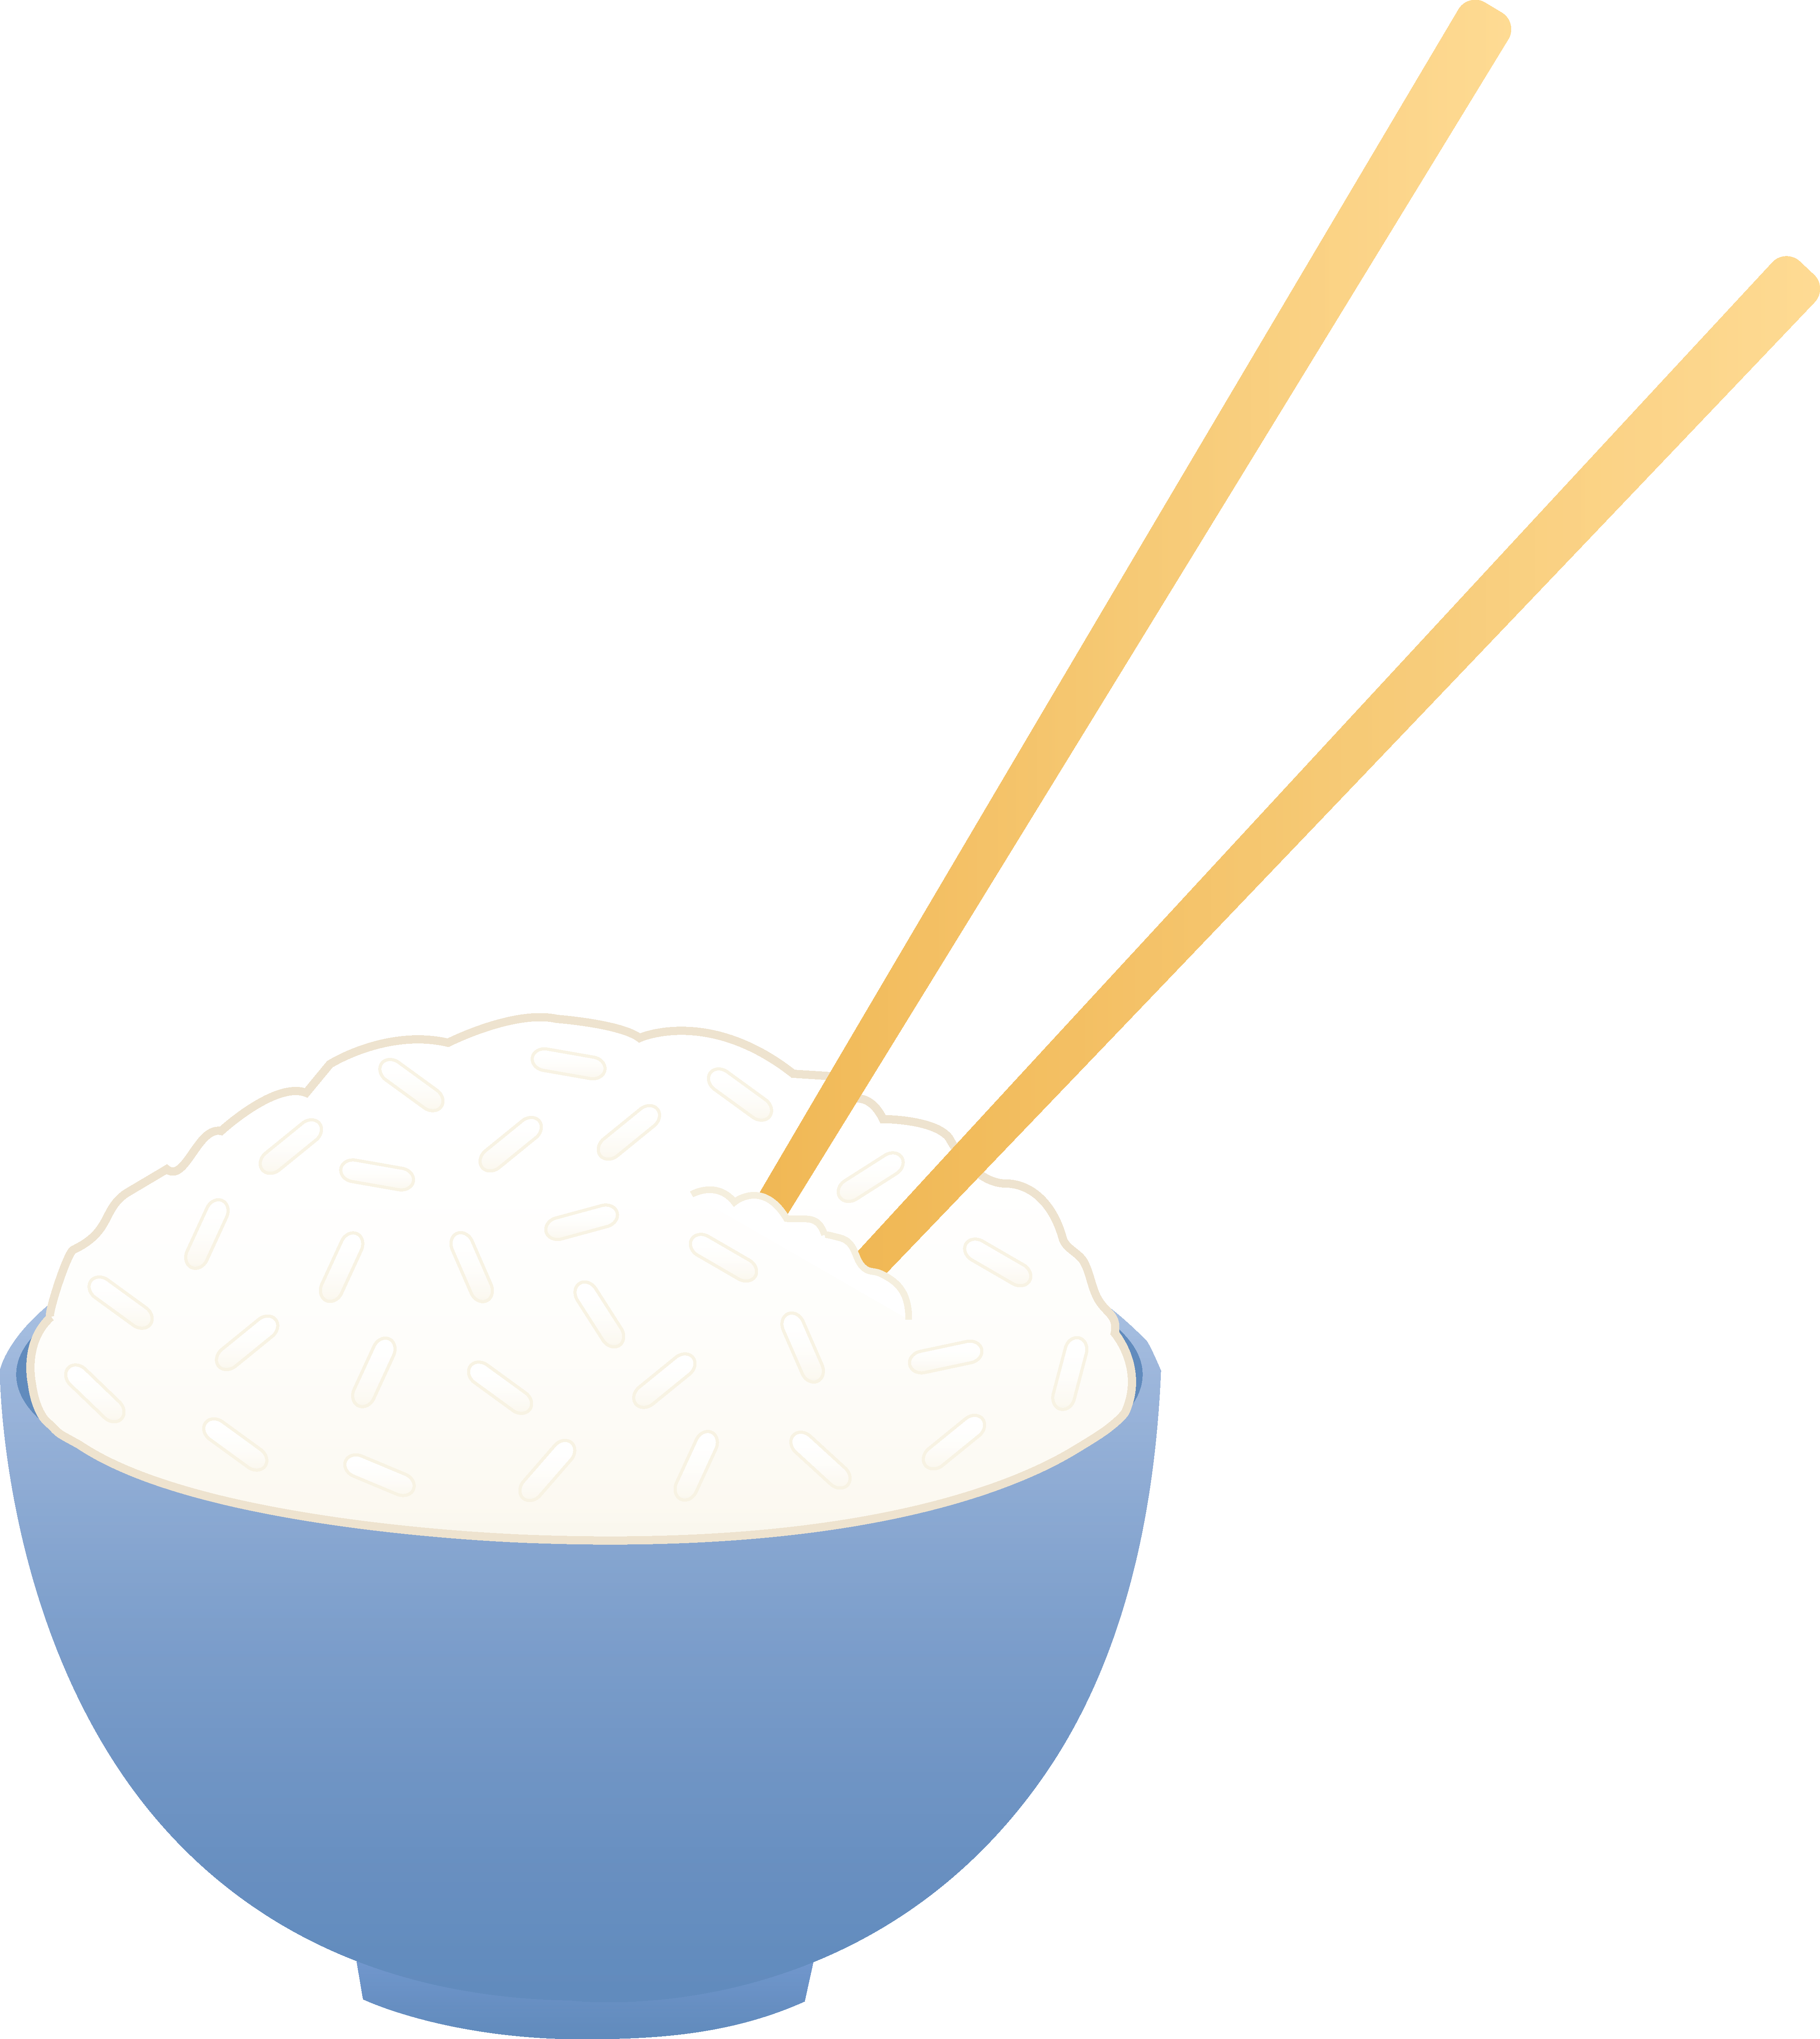 Bowl of rice clipart.